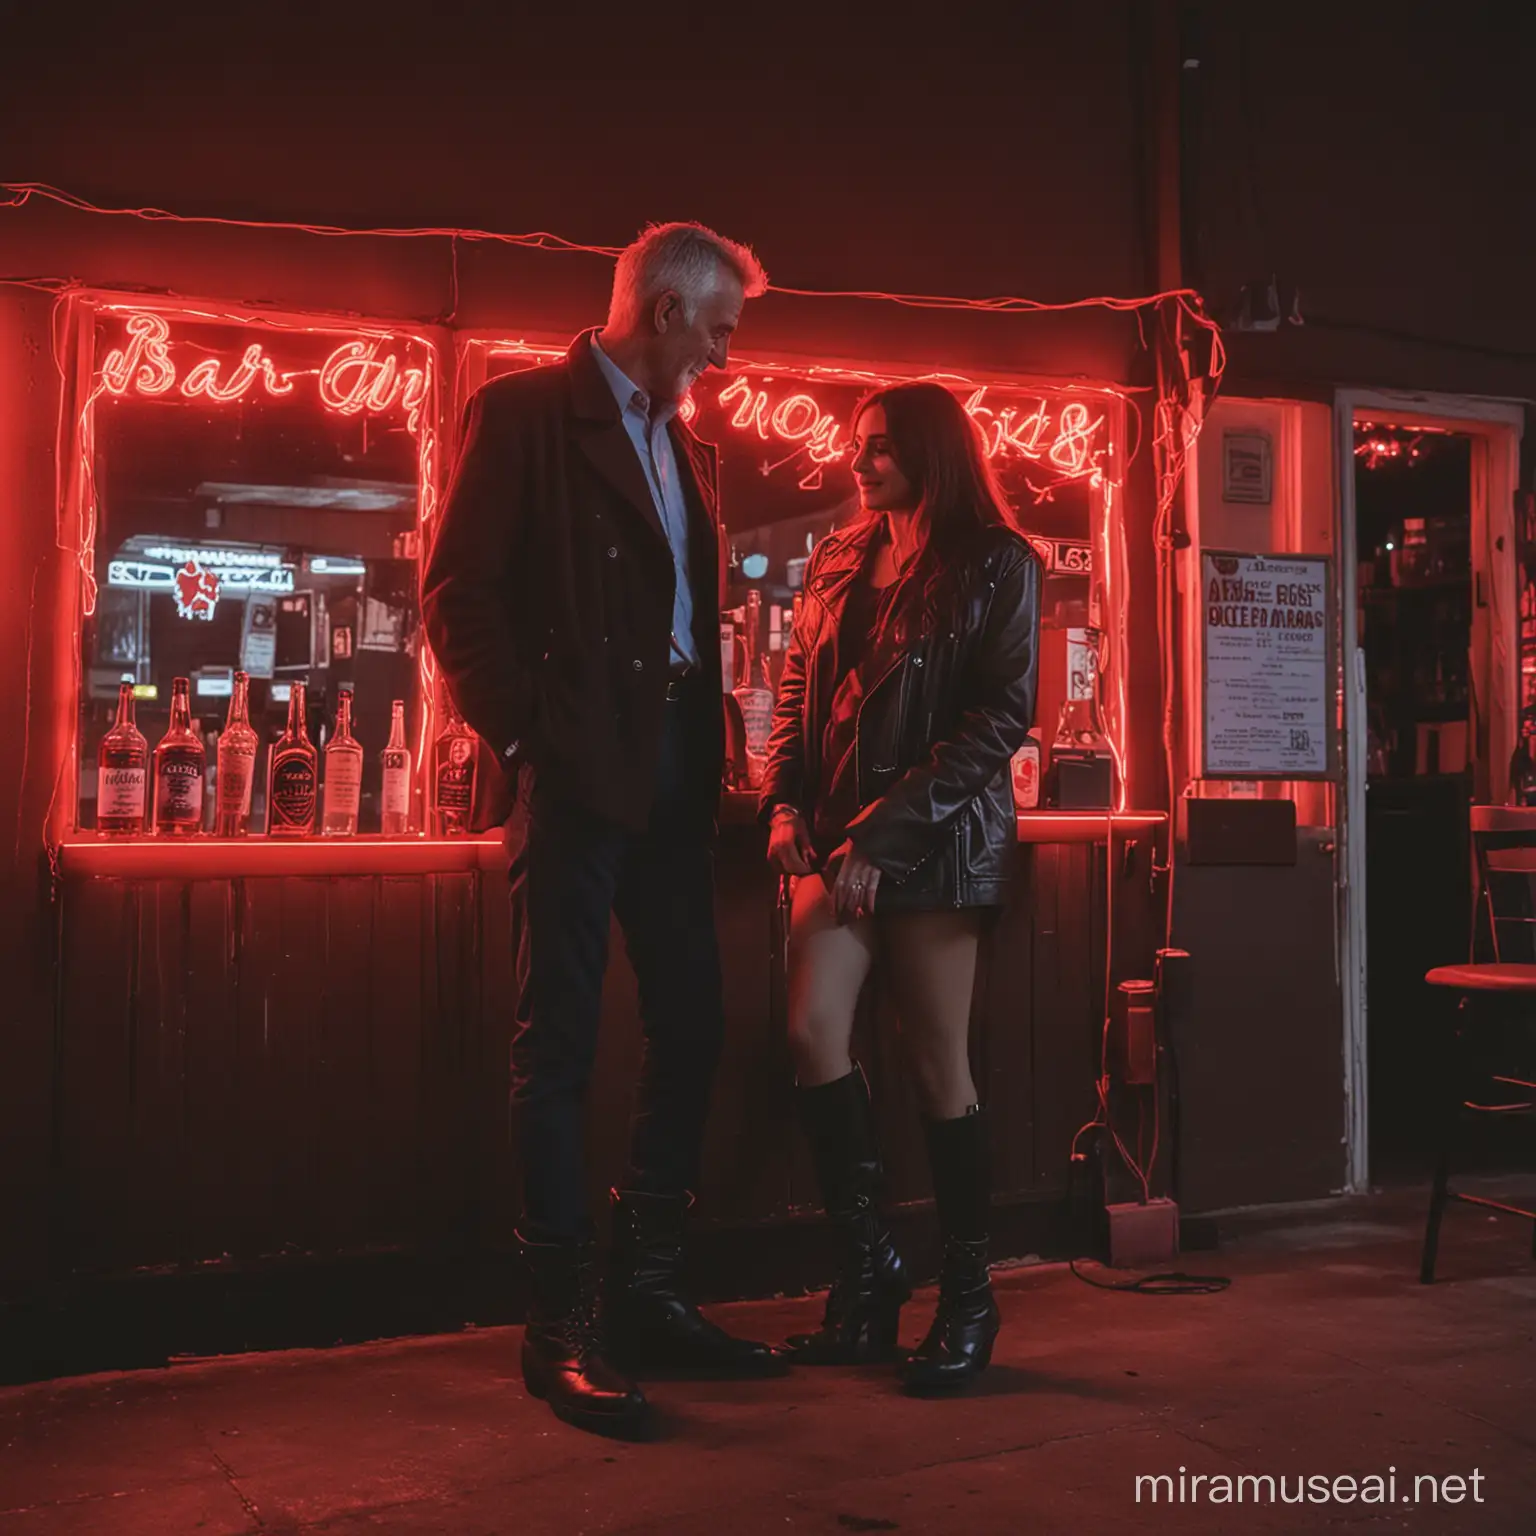 Older man younger woman, bar, romantic, fairylights, aesthetic, boots, handsome, red neon light, 